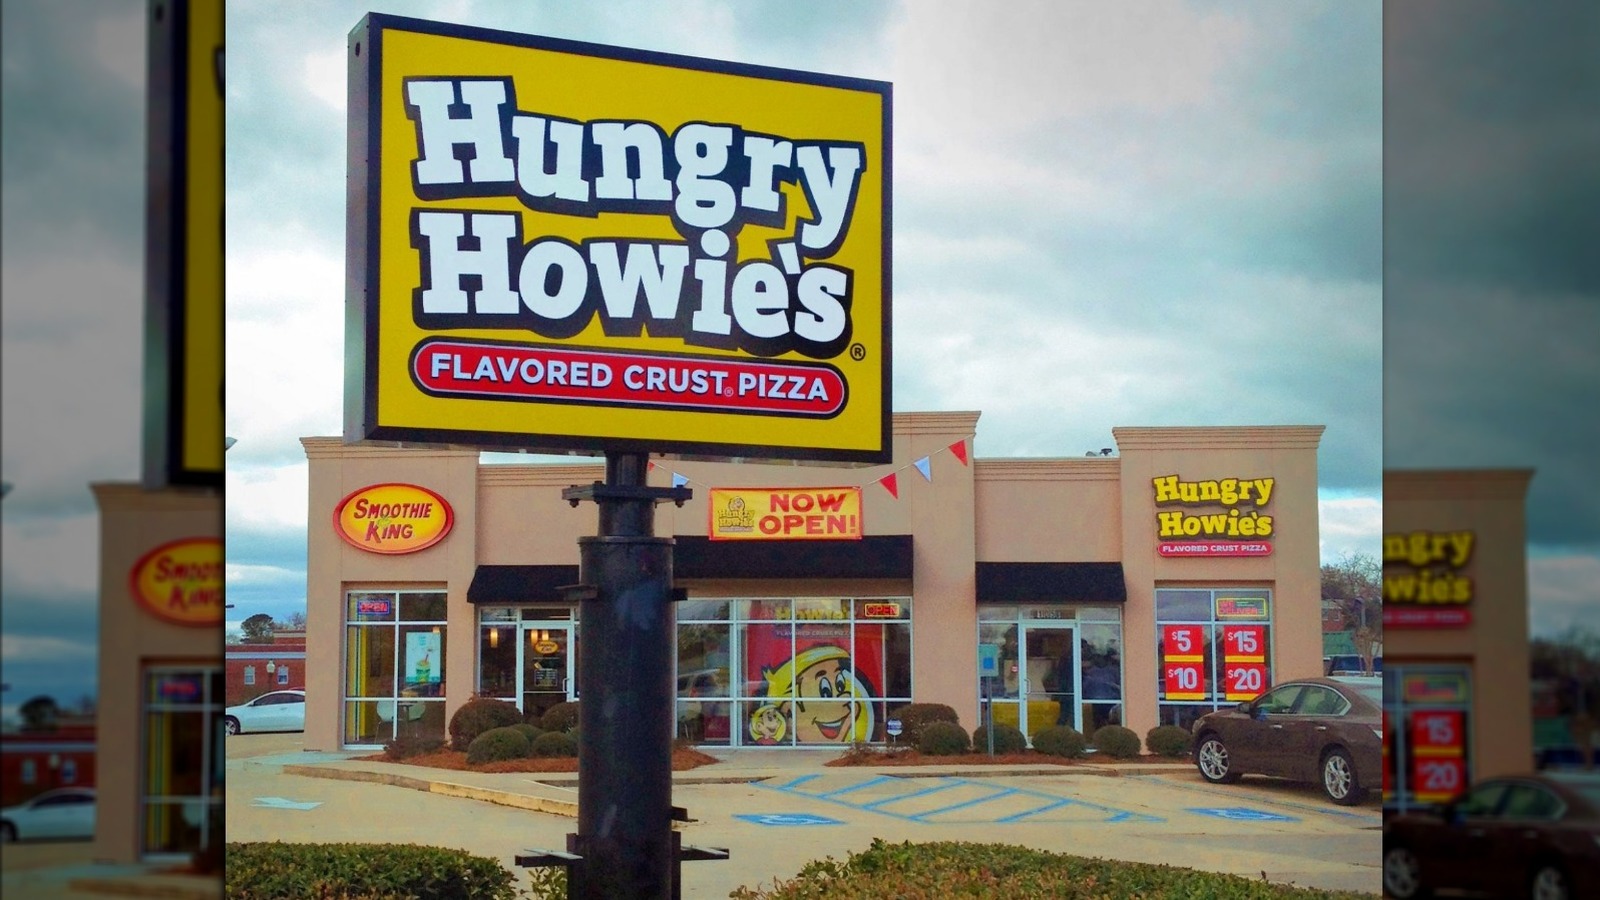 How Much It Really Costs To Open A Hungry Howie's Pizza Franchise